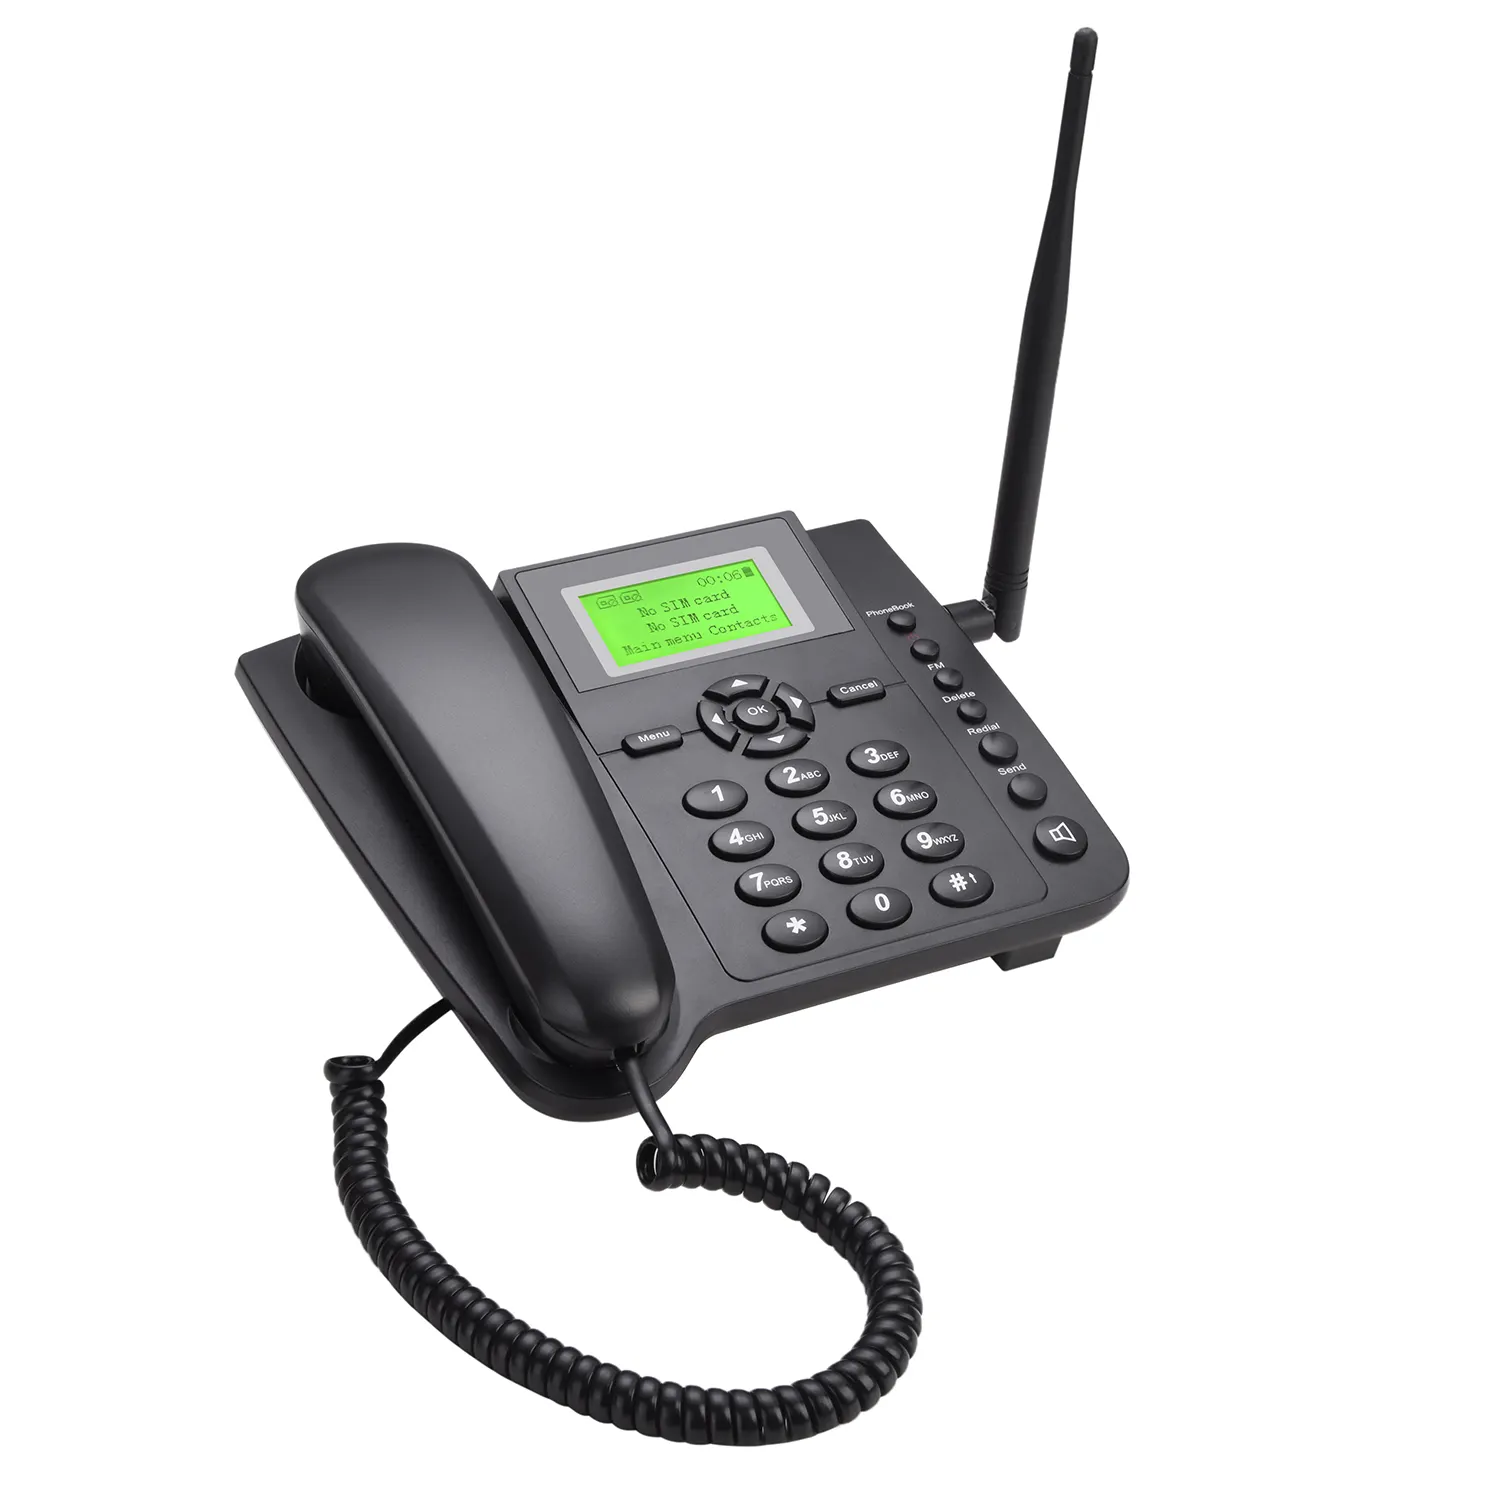 4G Fixed Wireless Phone Desktop Cordless Telephone Support VOLTE Dual With Sim Card For Office Home Business